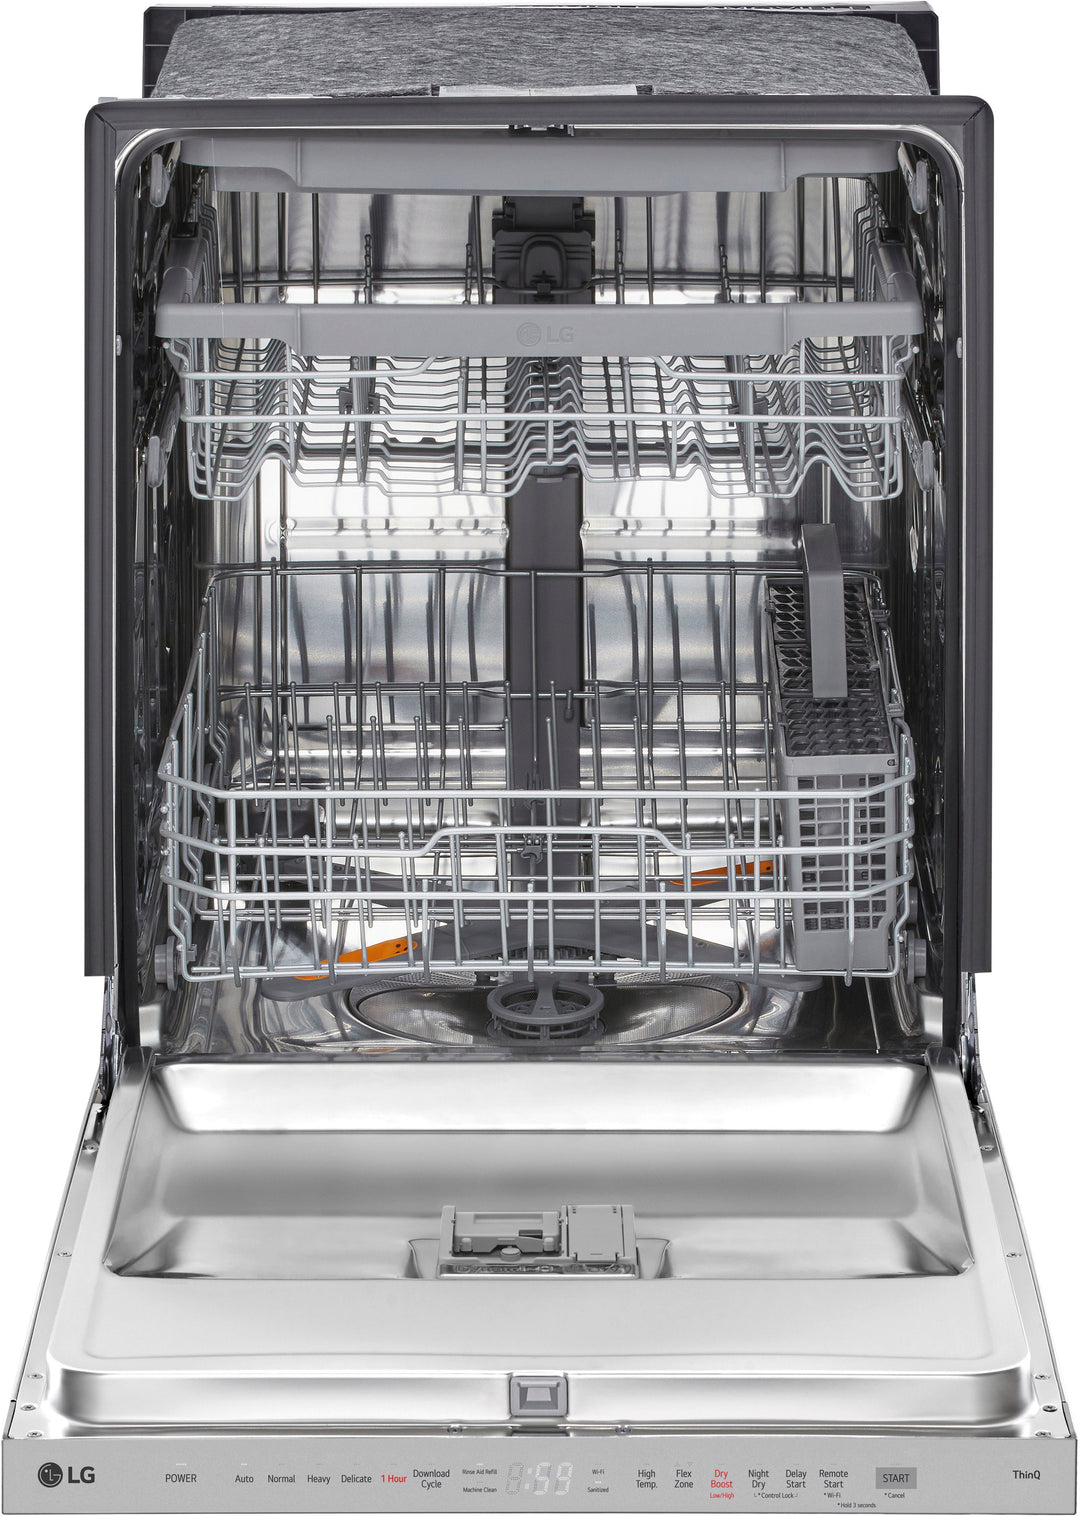 LG - Top Control Smart Built-in Stainless Steel Tub Dishwasher with 3rd Rack, QuadWash Pro and 46dBA - Stainless Steel_11